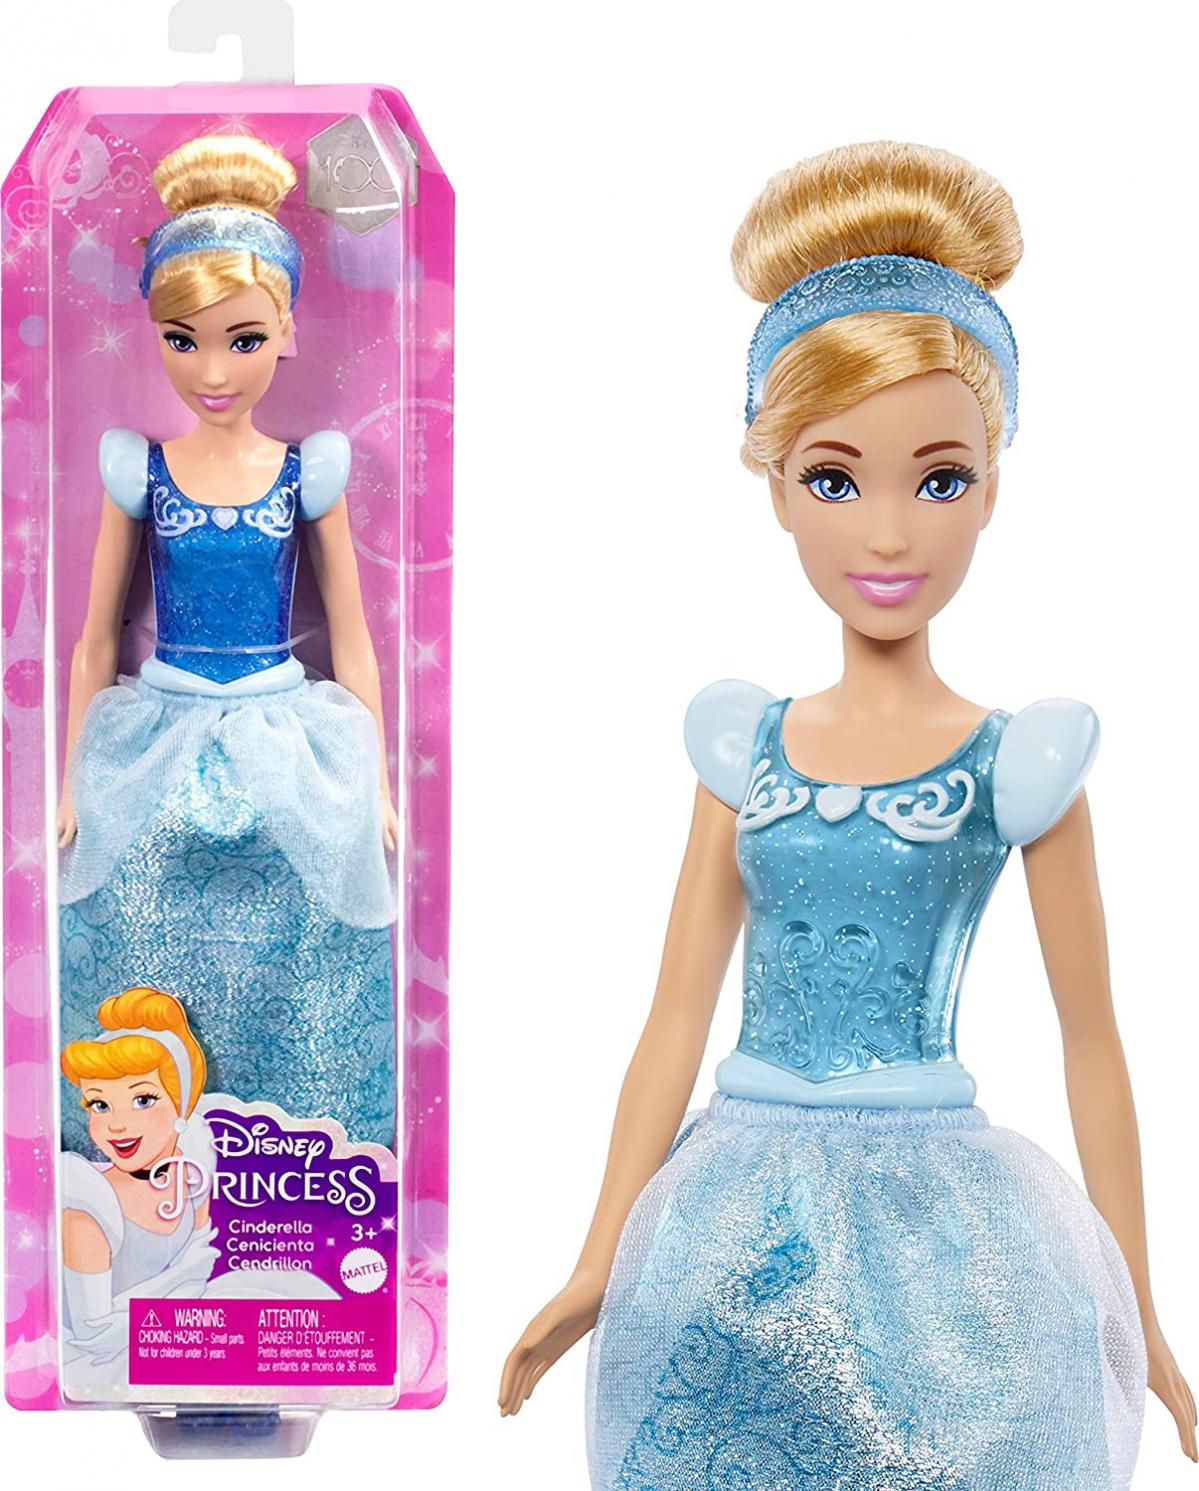 Disney Princess Cinderella Fashion Doll, New for 2023, Sparkling Look with Blonde Hair, Blue Eyes & Hair Accessory